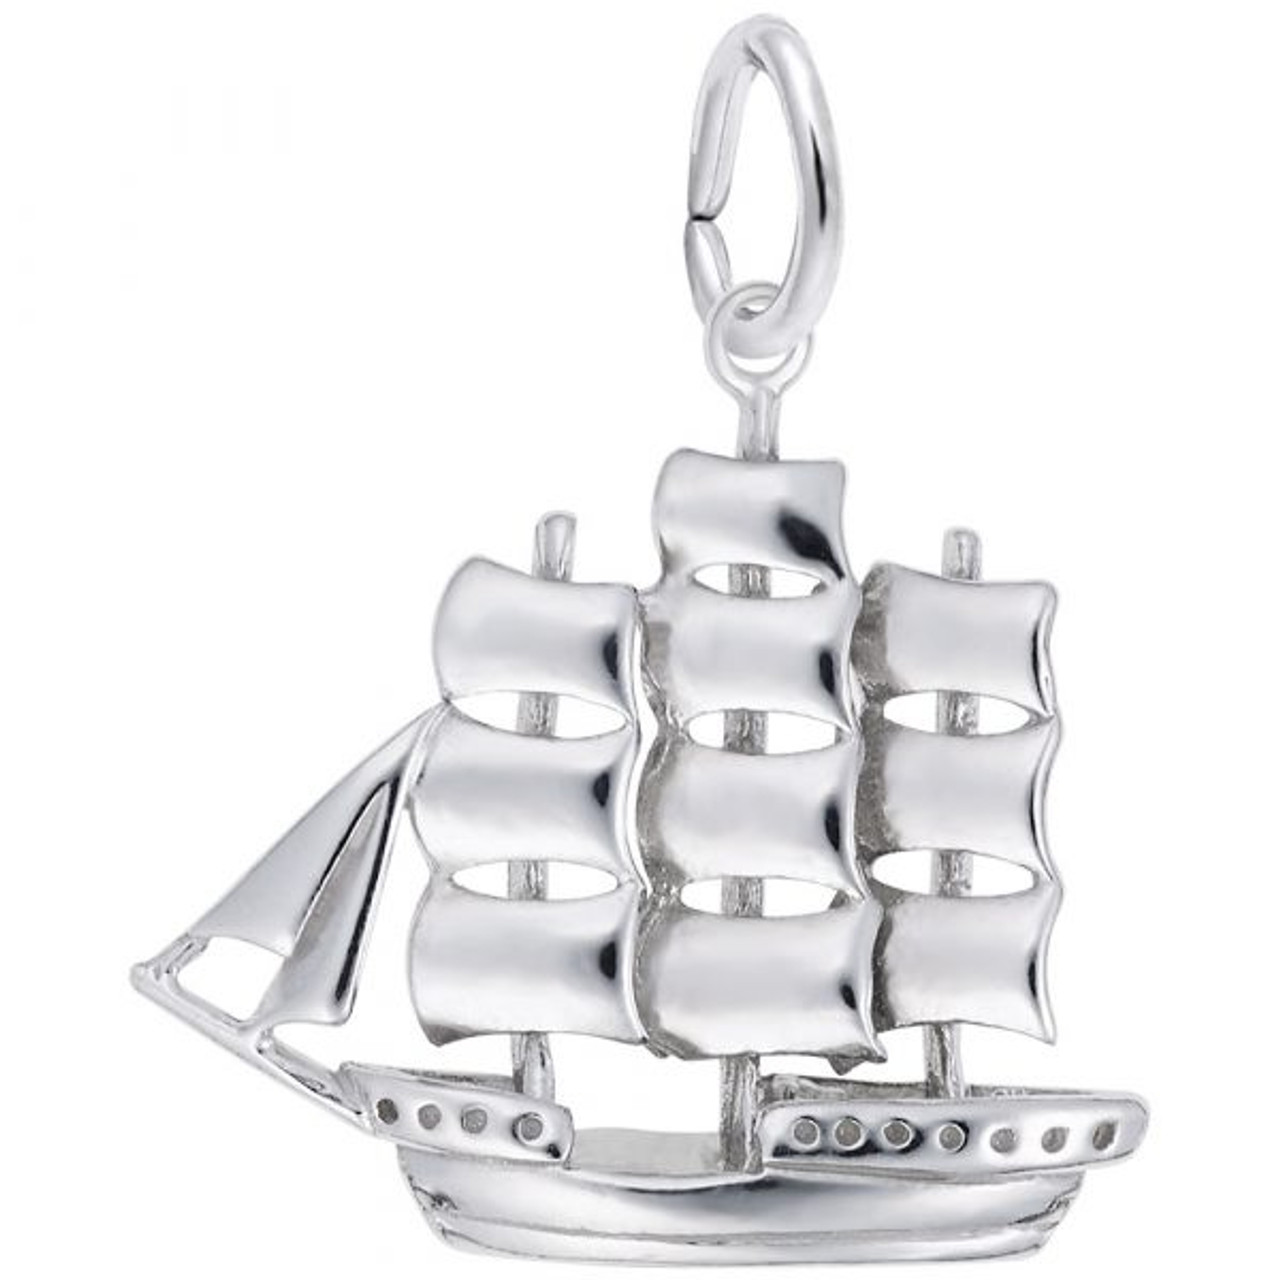 Full-Rigged Ship Charm - Sterling Silver and 14k White Gold